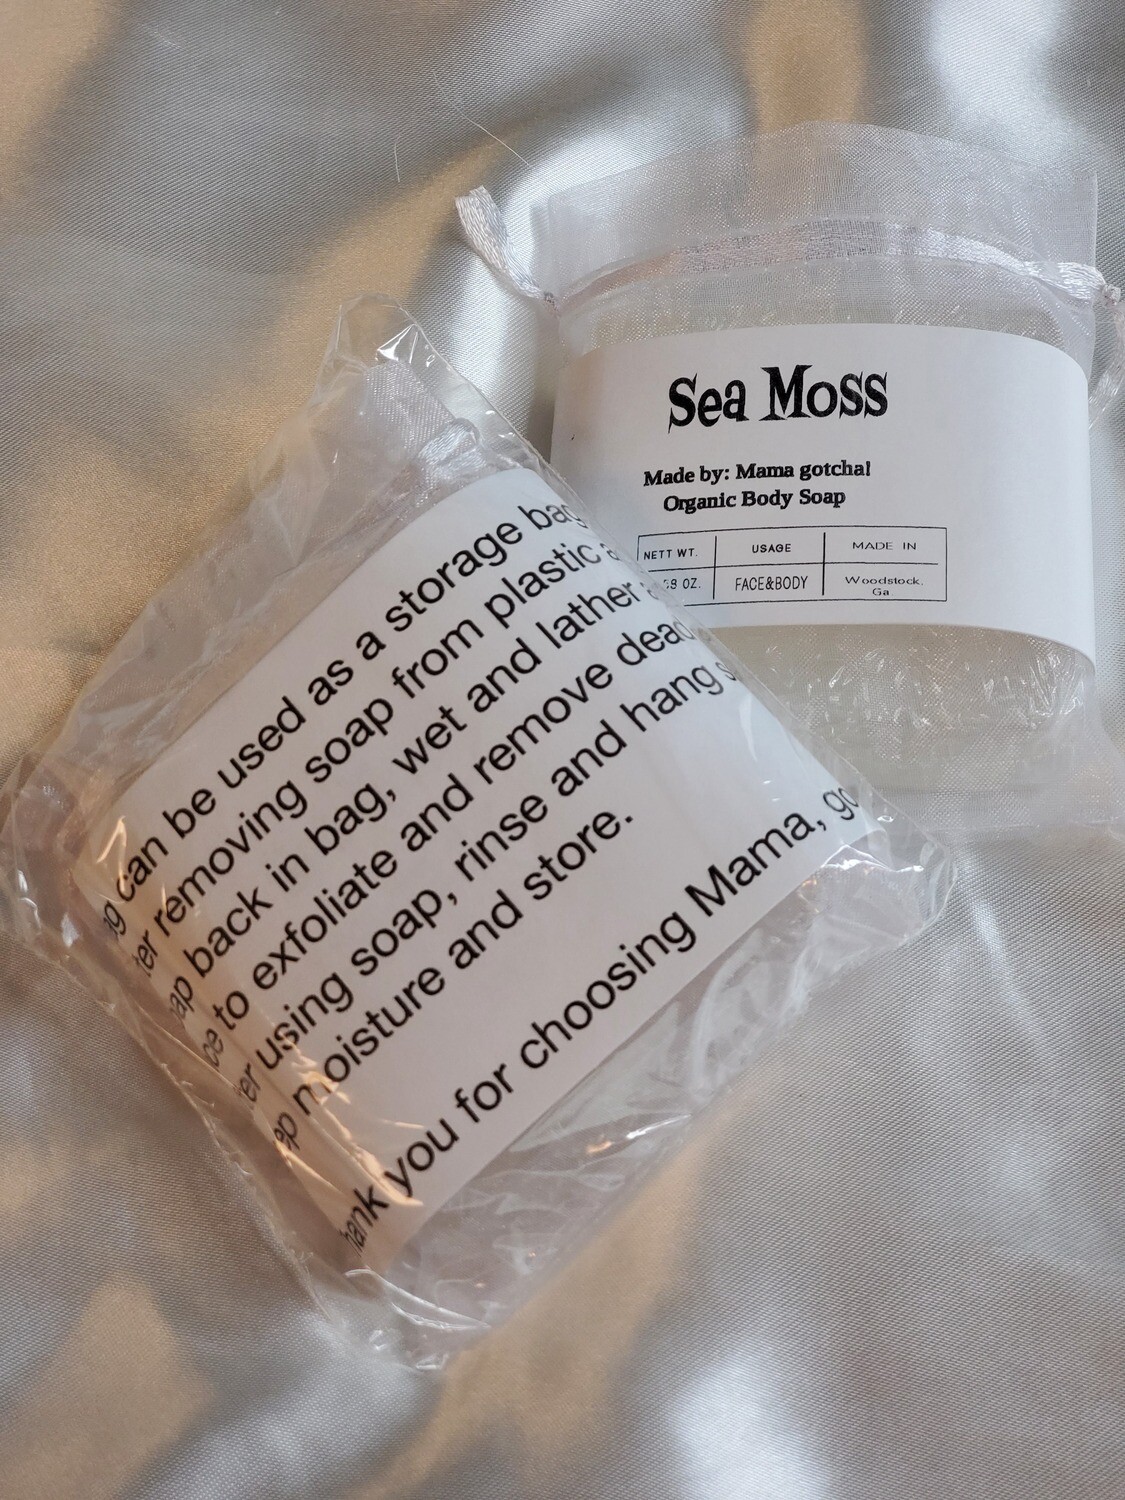 How To Make Sea Moss Soap : Maybe you would like to learn more about